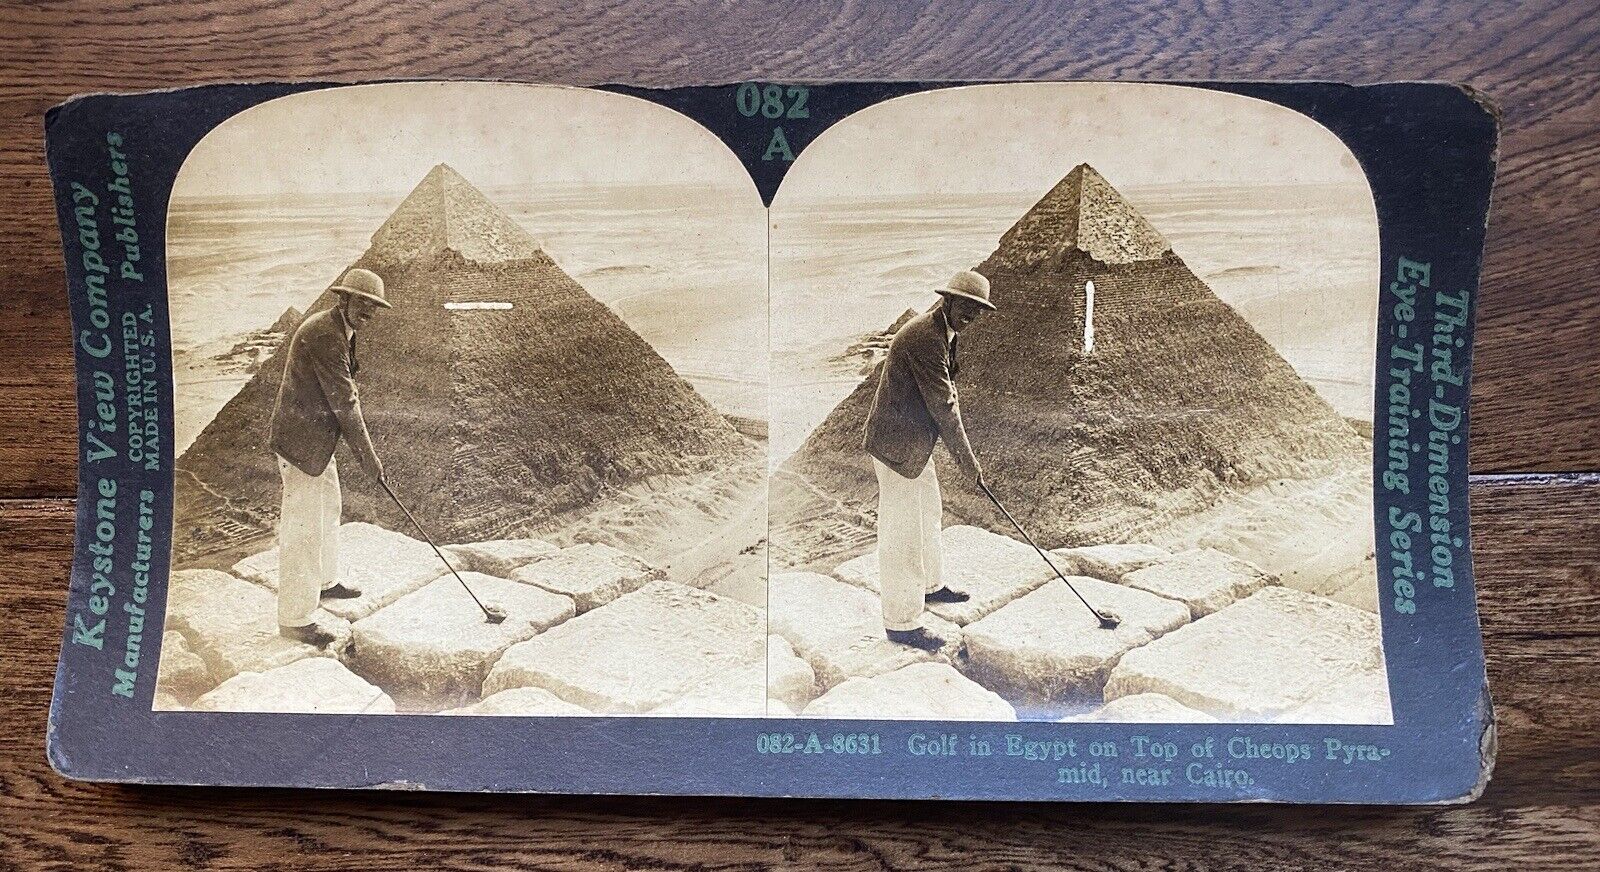 Egypt Stereoview Man on Cheops Pyramid Near Cairo with Golf Club Vintage Photo